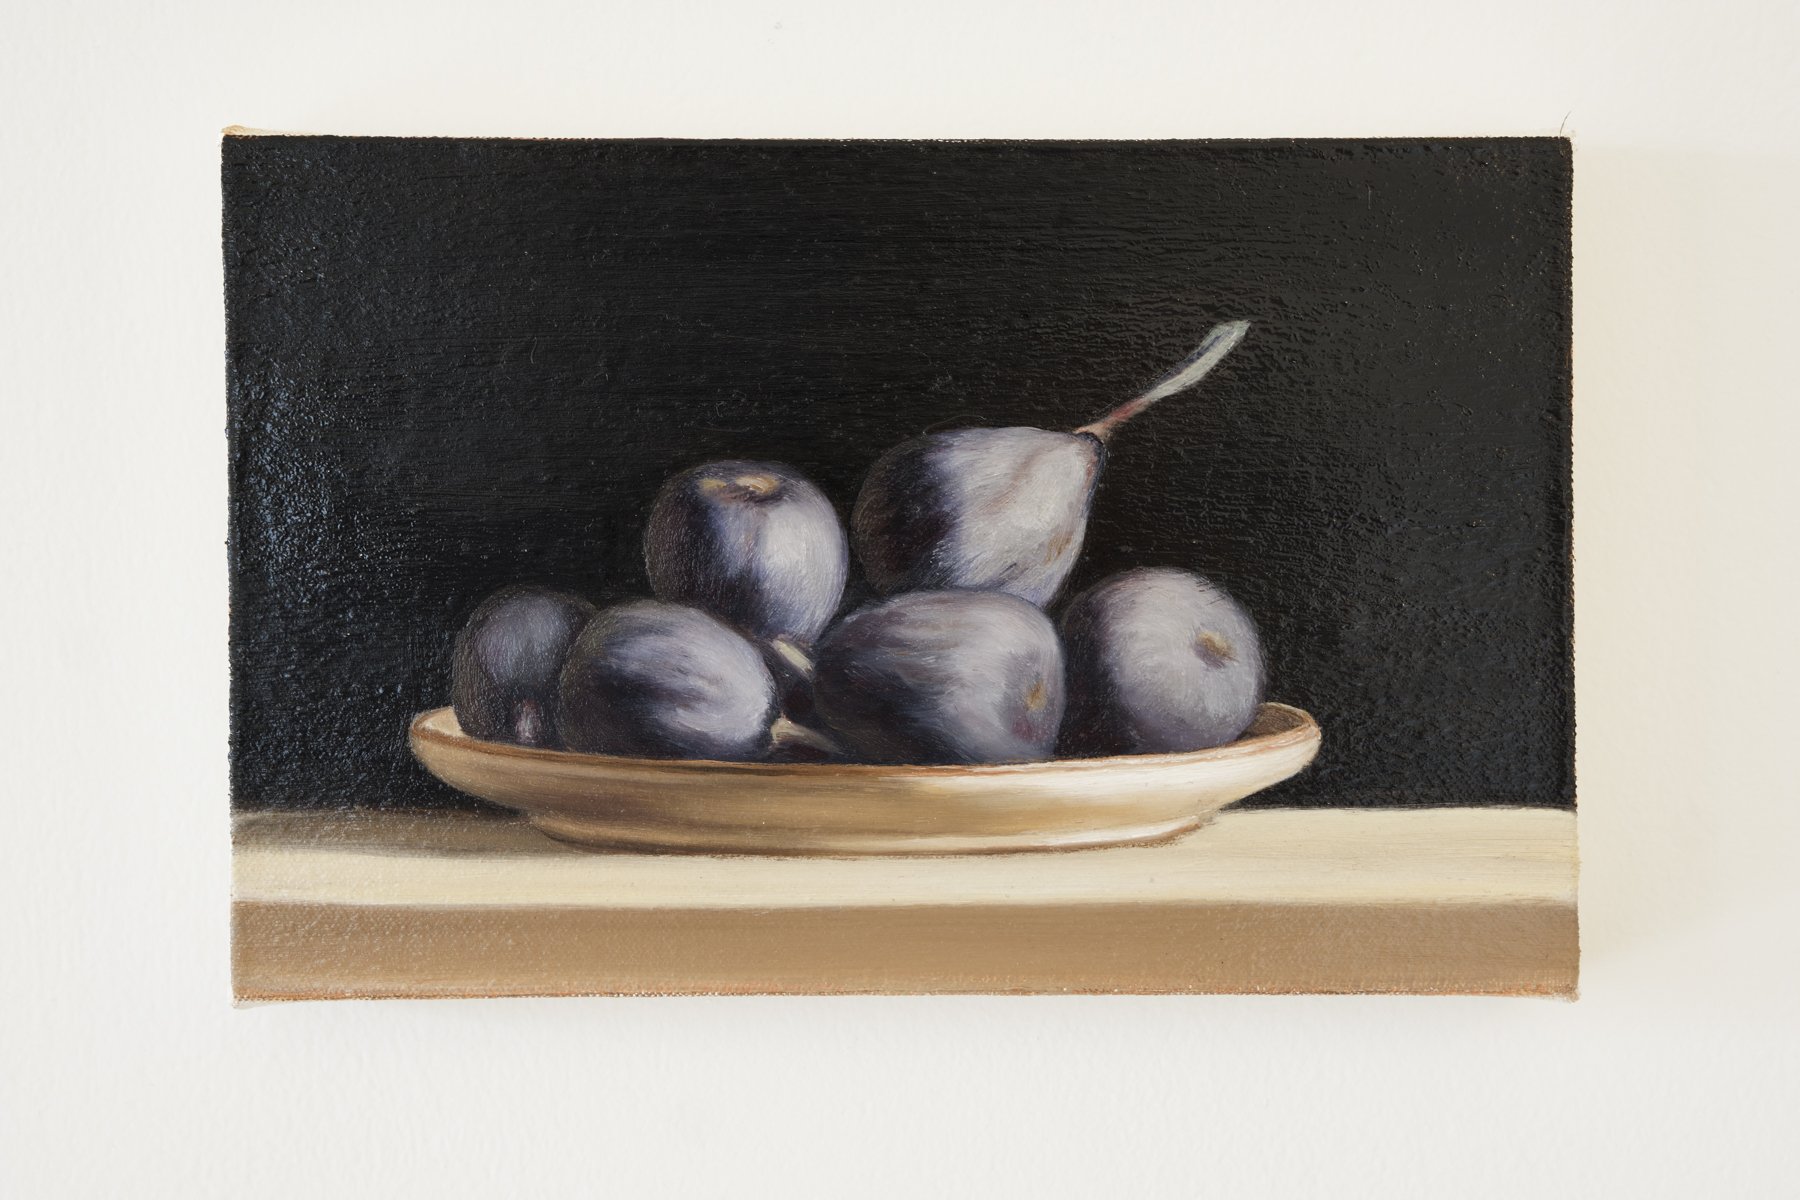 Figs, 2021. Oil on canvas. 7 x 10.5"